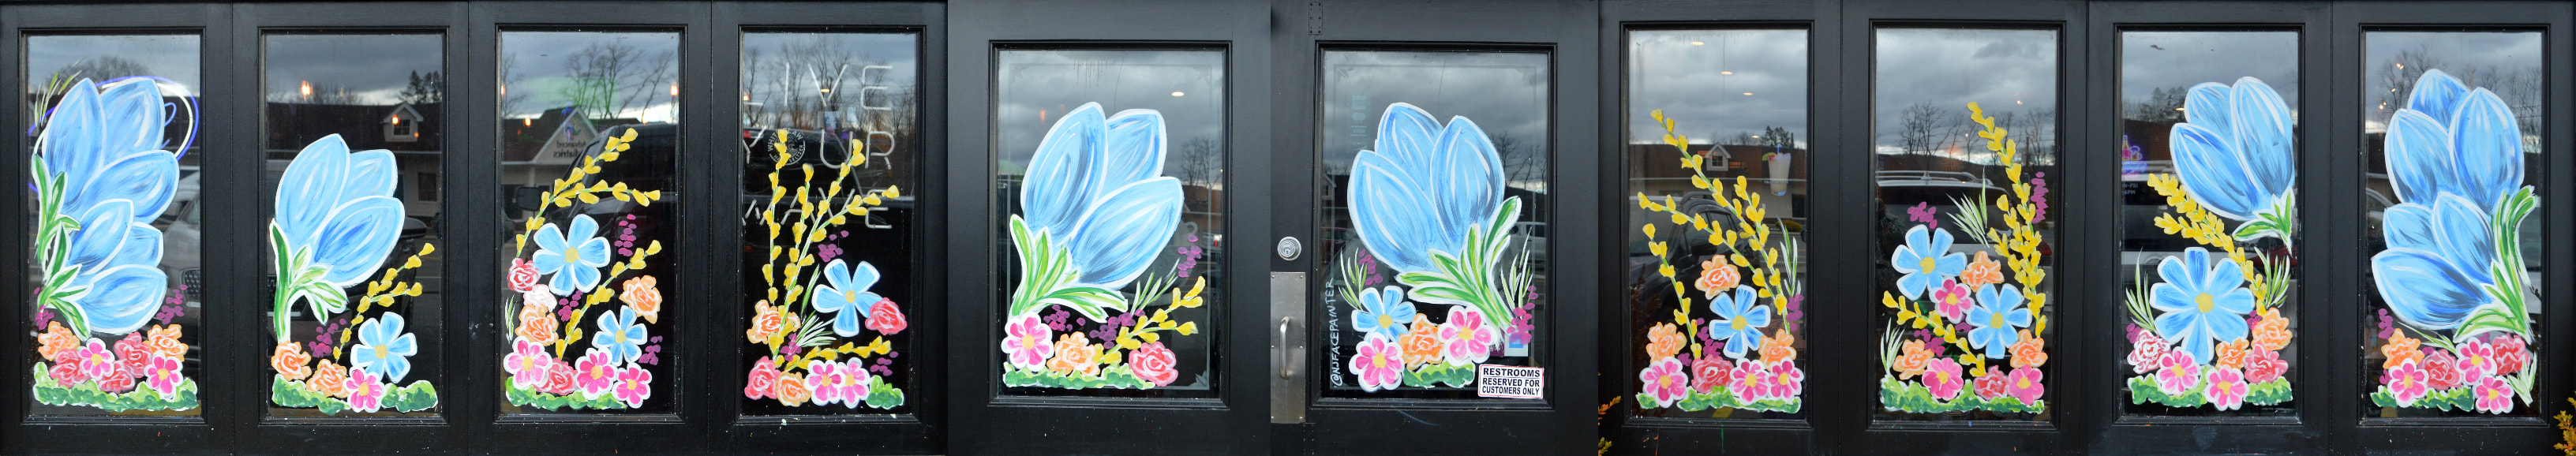 Spring Window Painting at The Copper Still in Pomona, Rockland County, NY featuring blue tulips and other flowers